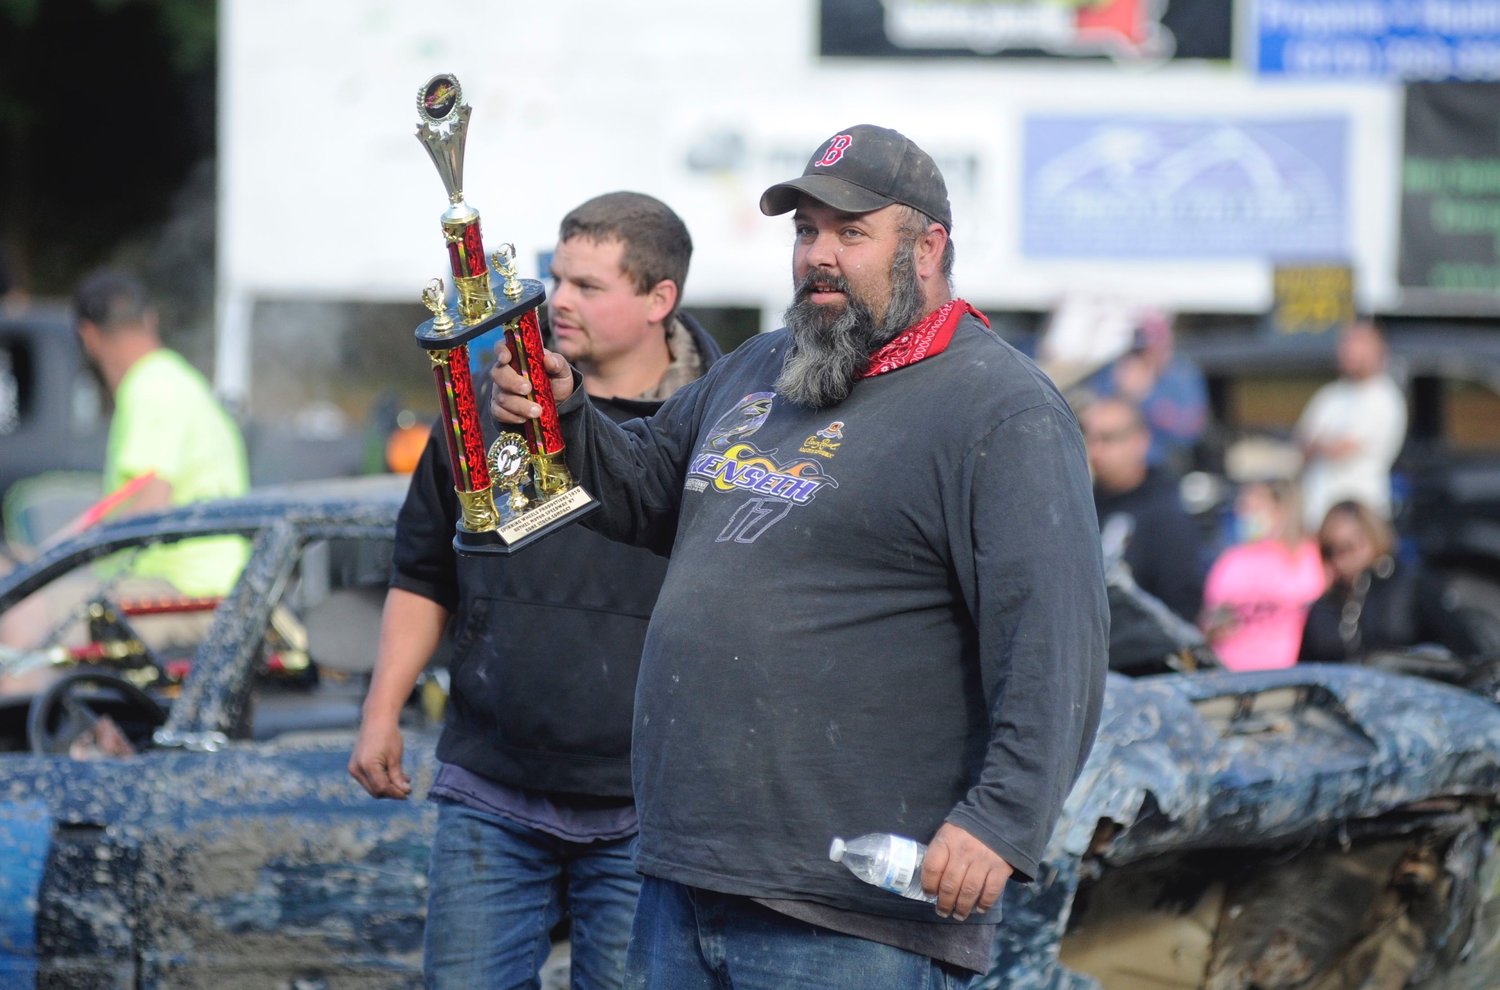 Last man standing. Tommy Goodspeed, winner of the bone stock compact division, was walking proud after the contest.